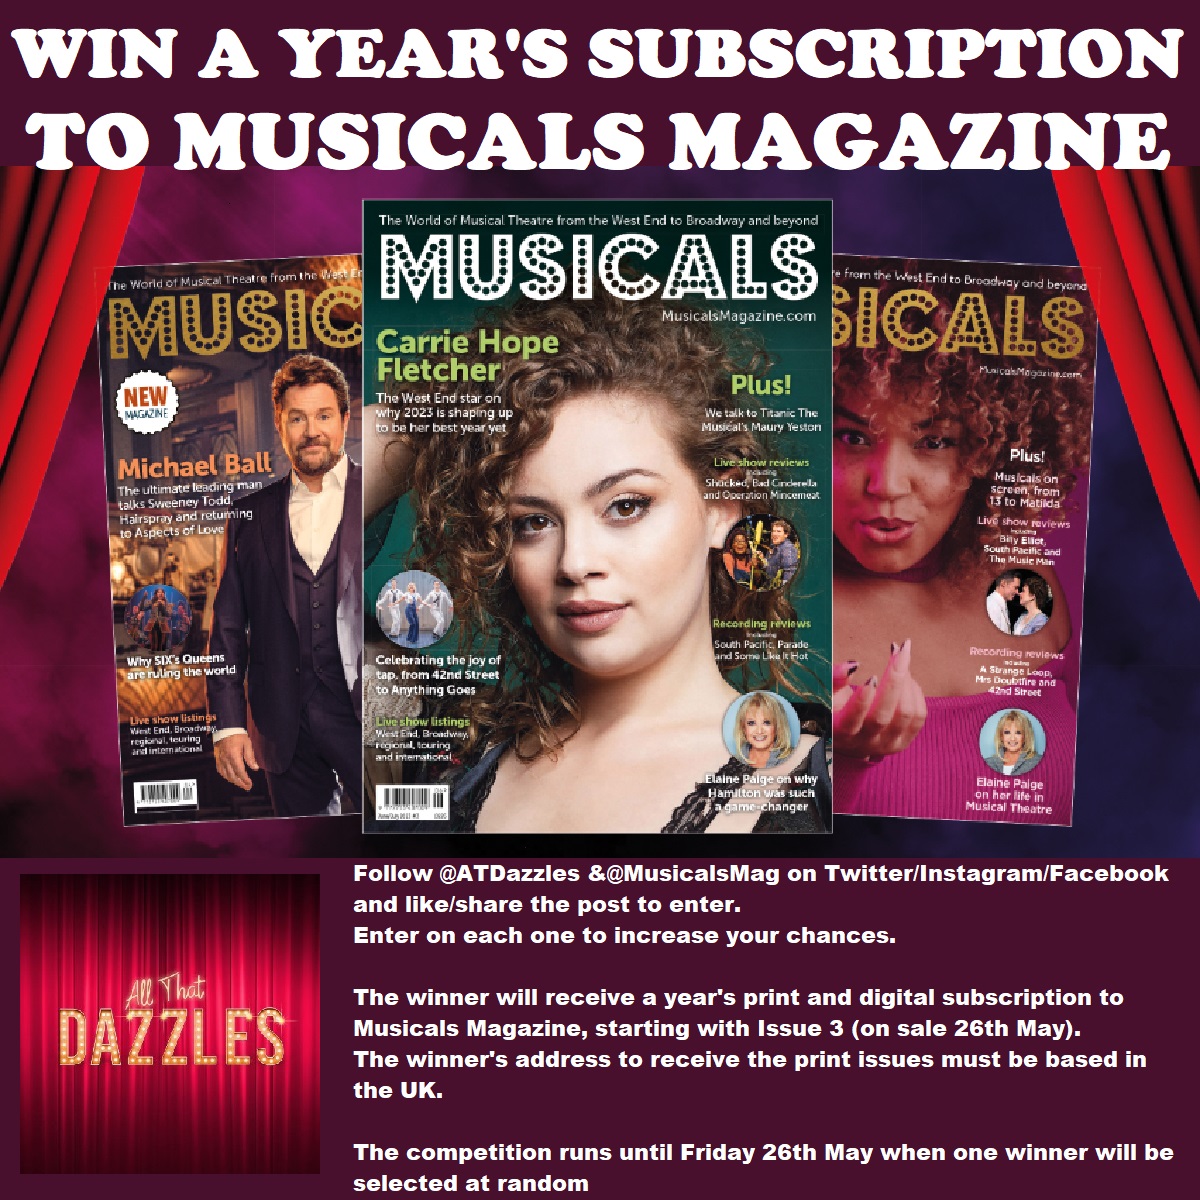 NEW GIVEAWAY ALERT I'm offering a year's digital & print subscription to @MusicalsMag starting with Issue 3. To enter, like or retweet this post. Reply with your favourite musical for an extra entry. You must be following me to enter. The winner will be randomly picked on 26 May.